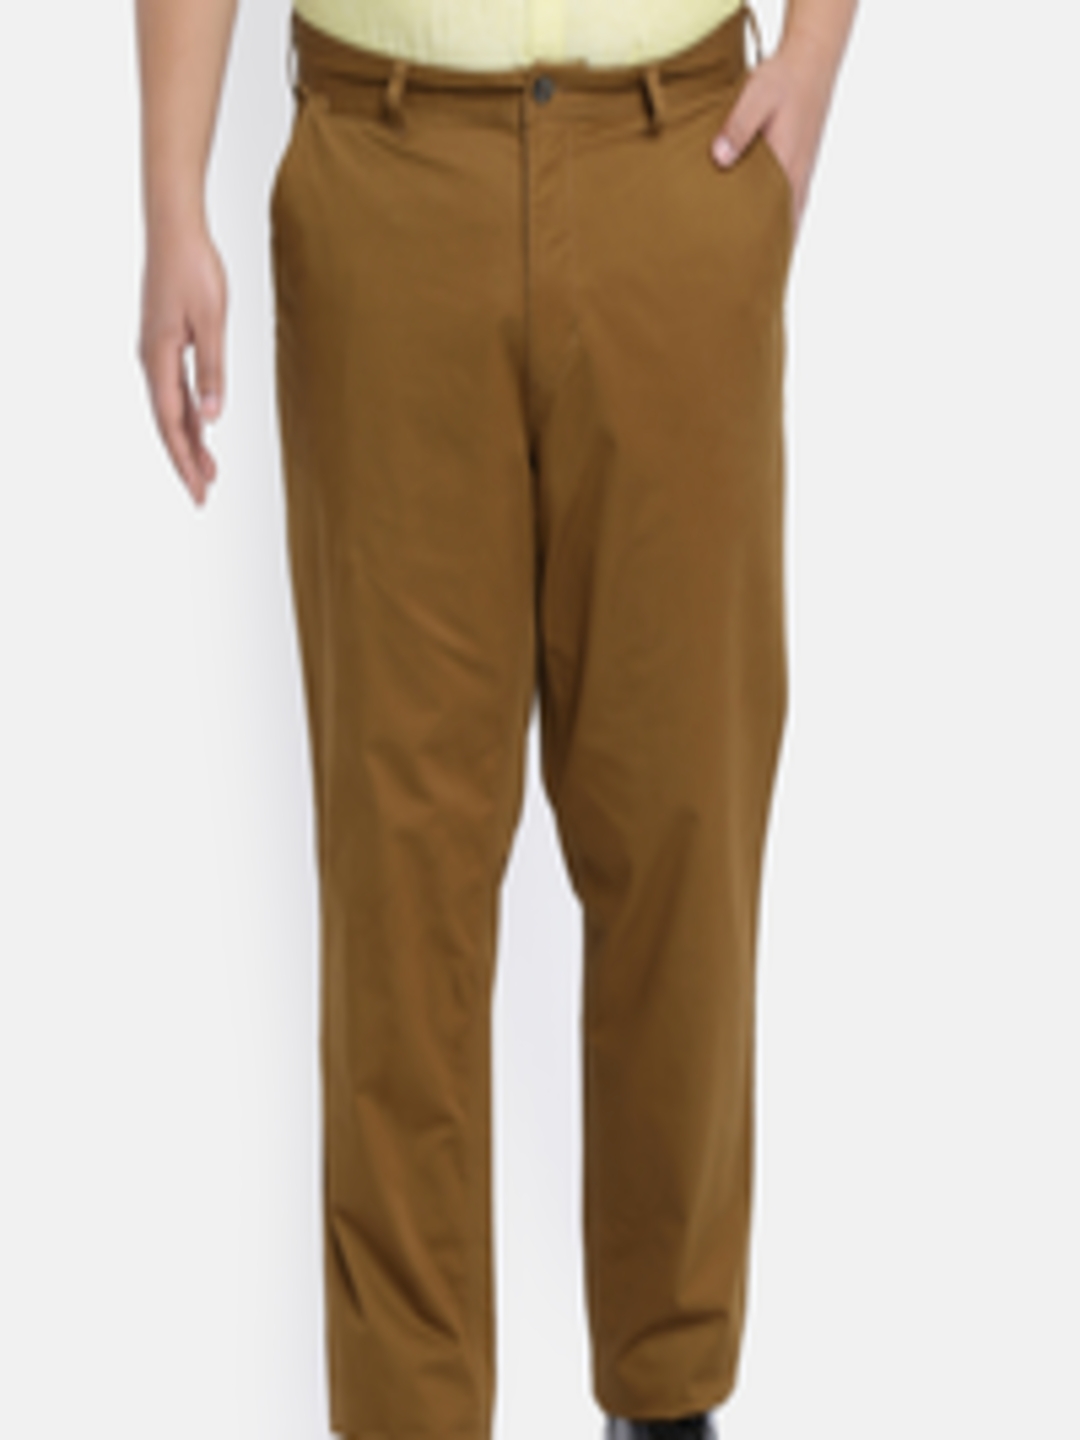 Buy ALL Plus Size Men Khaki Brown Regular Fit Solid Chinos - Trousers ...